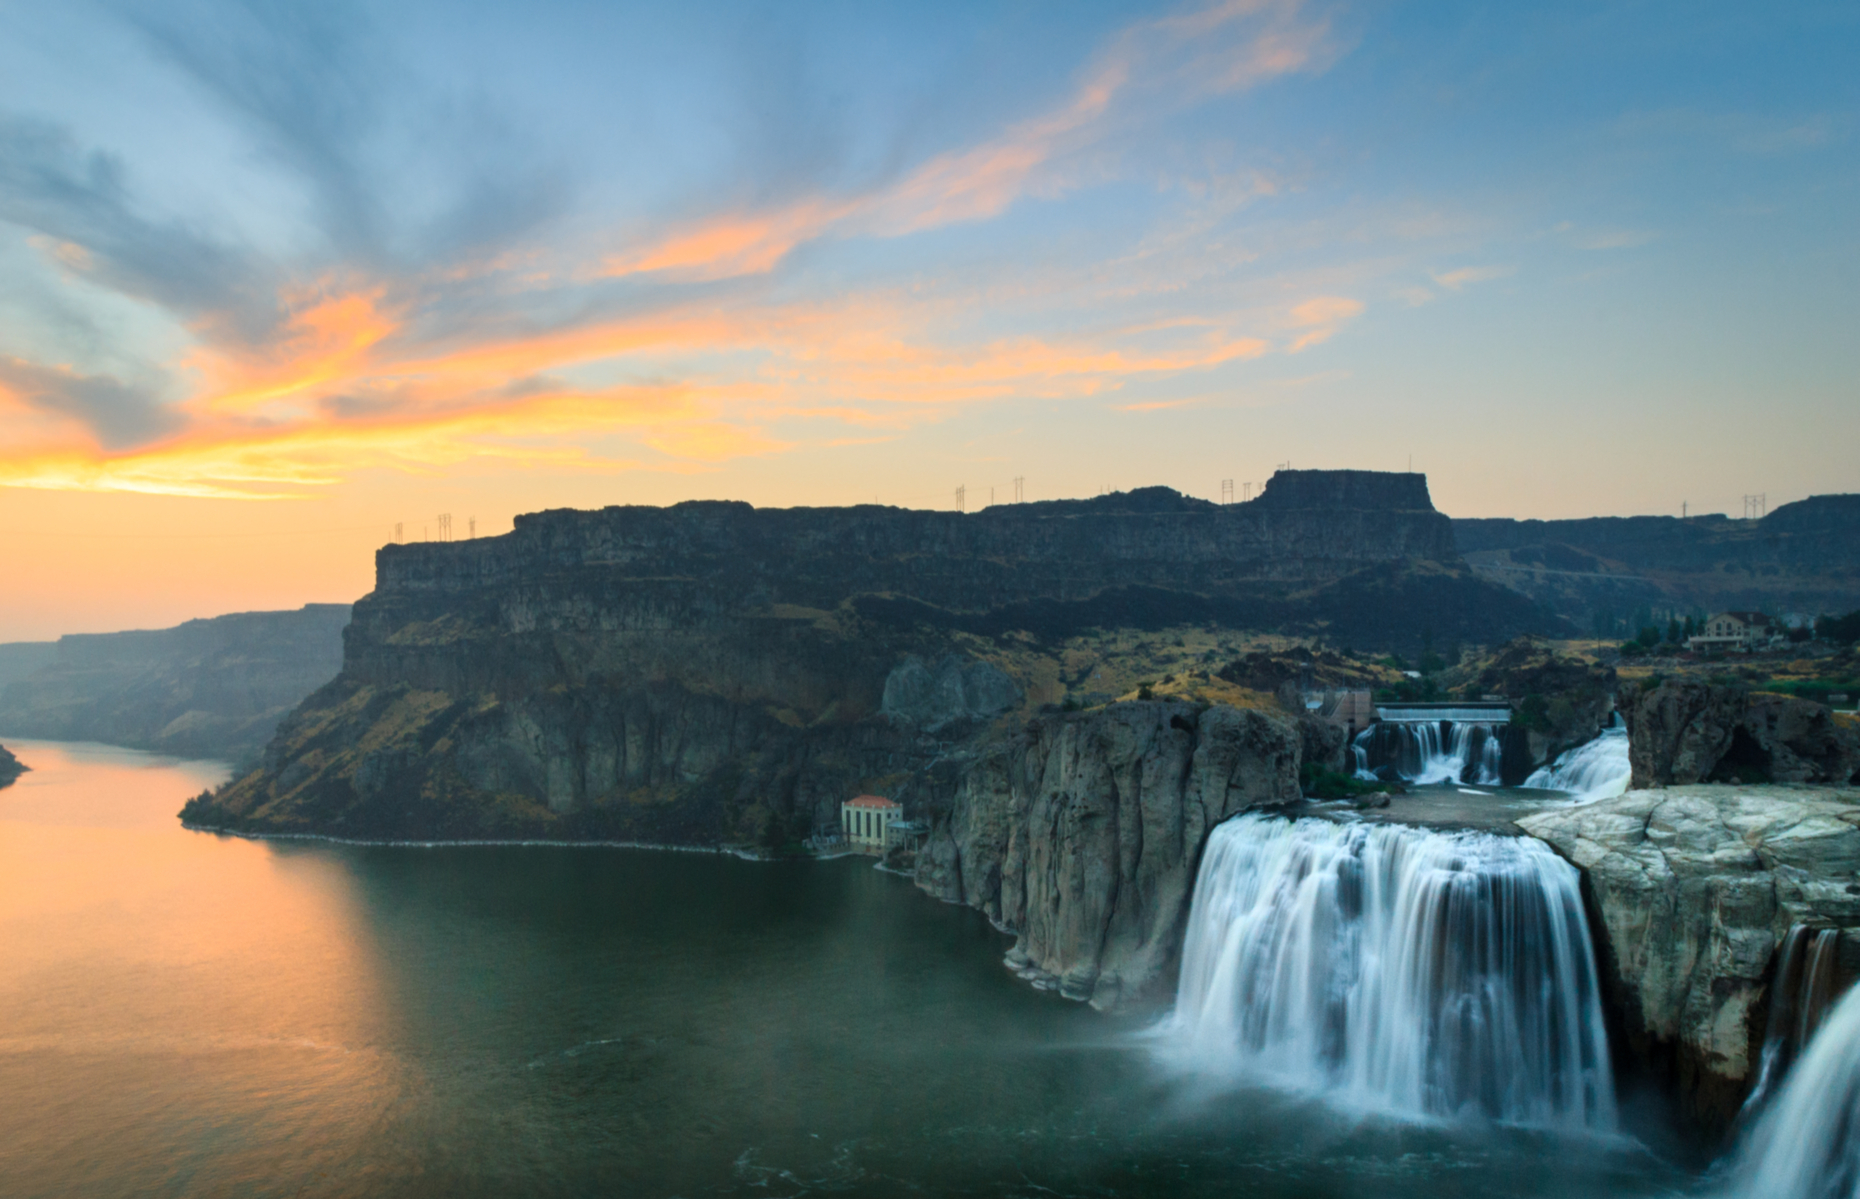 <p class="p1"><span>Nicknamed “The Niagara of the West,” at <a href="https://visitidaho.org/things-to-do/natural-attractions/shoshone-falls/" rel="noreferrer noopener"><span>212 feet tall and 900 feet wide</span></a>, Shoshone Falls is one of the biggest waterfalls in the U.S. (in fact it’s even bigger than Niagara Falls). Located on the Snake River in southern Idaho, this natural wonder is truly a sight to behold. </span></p>